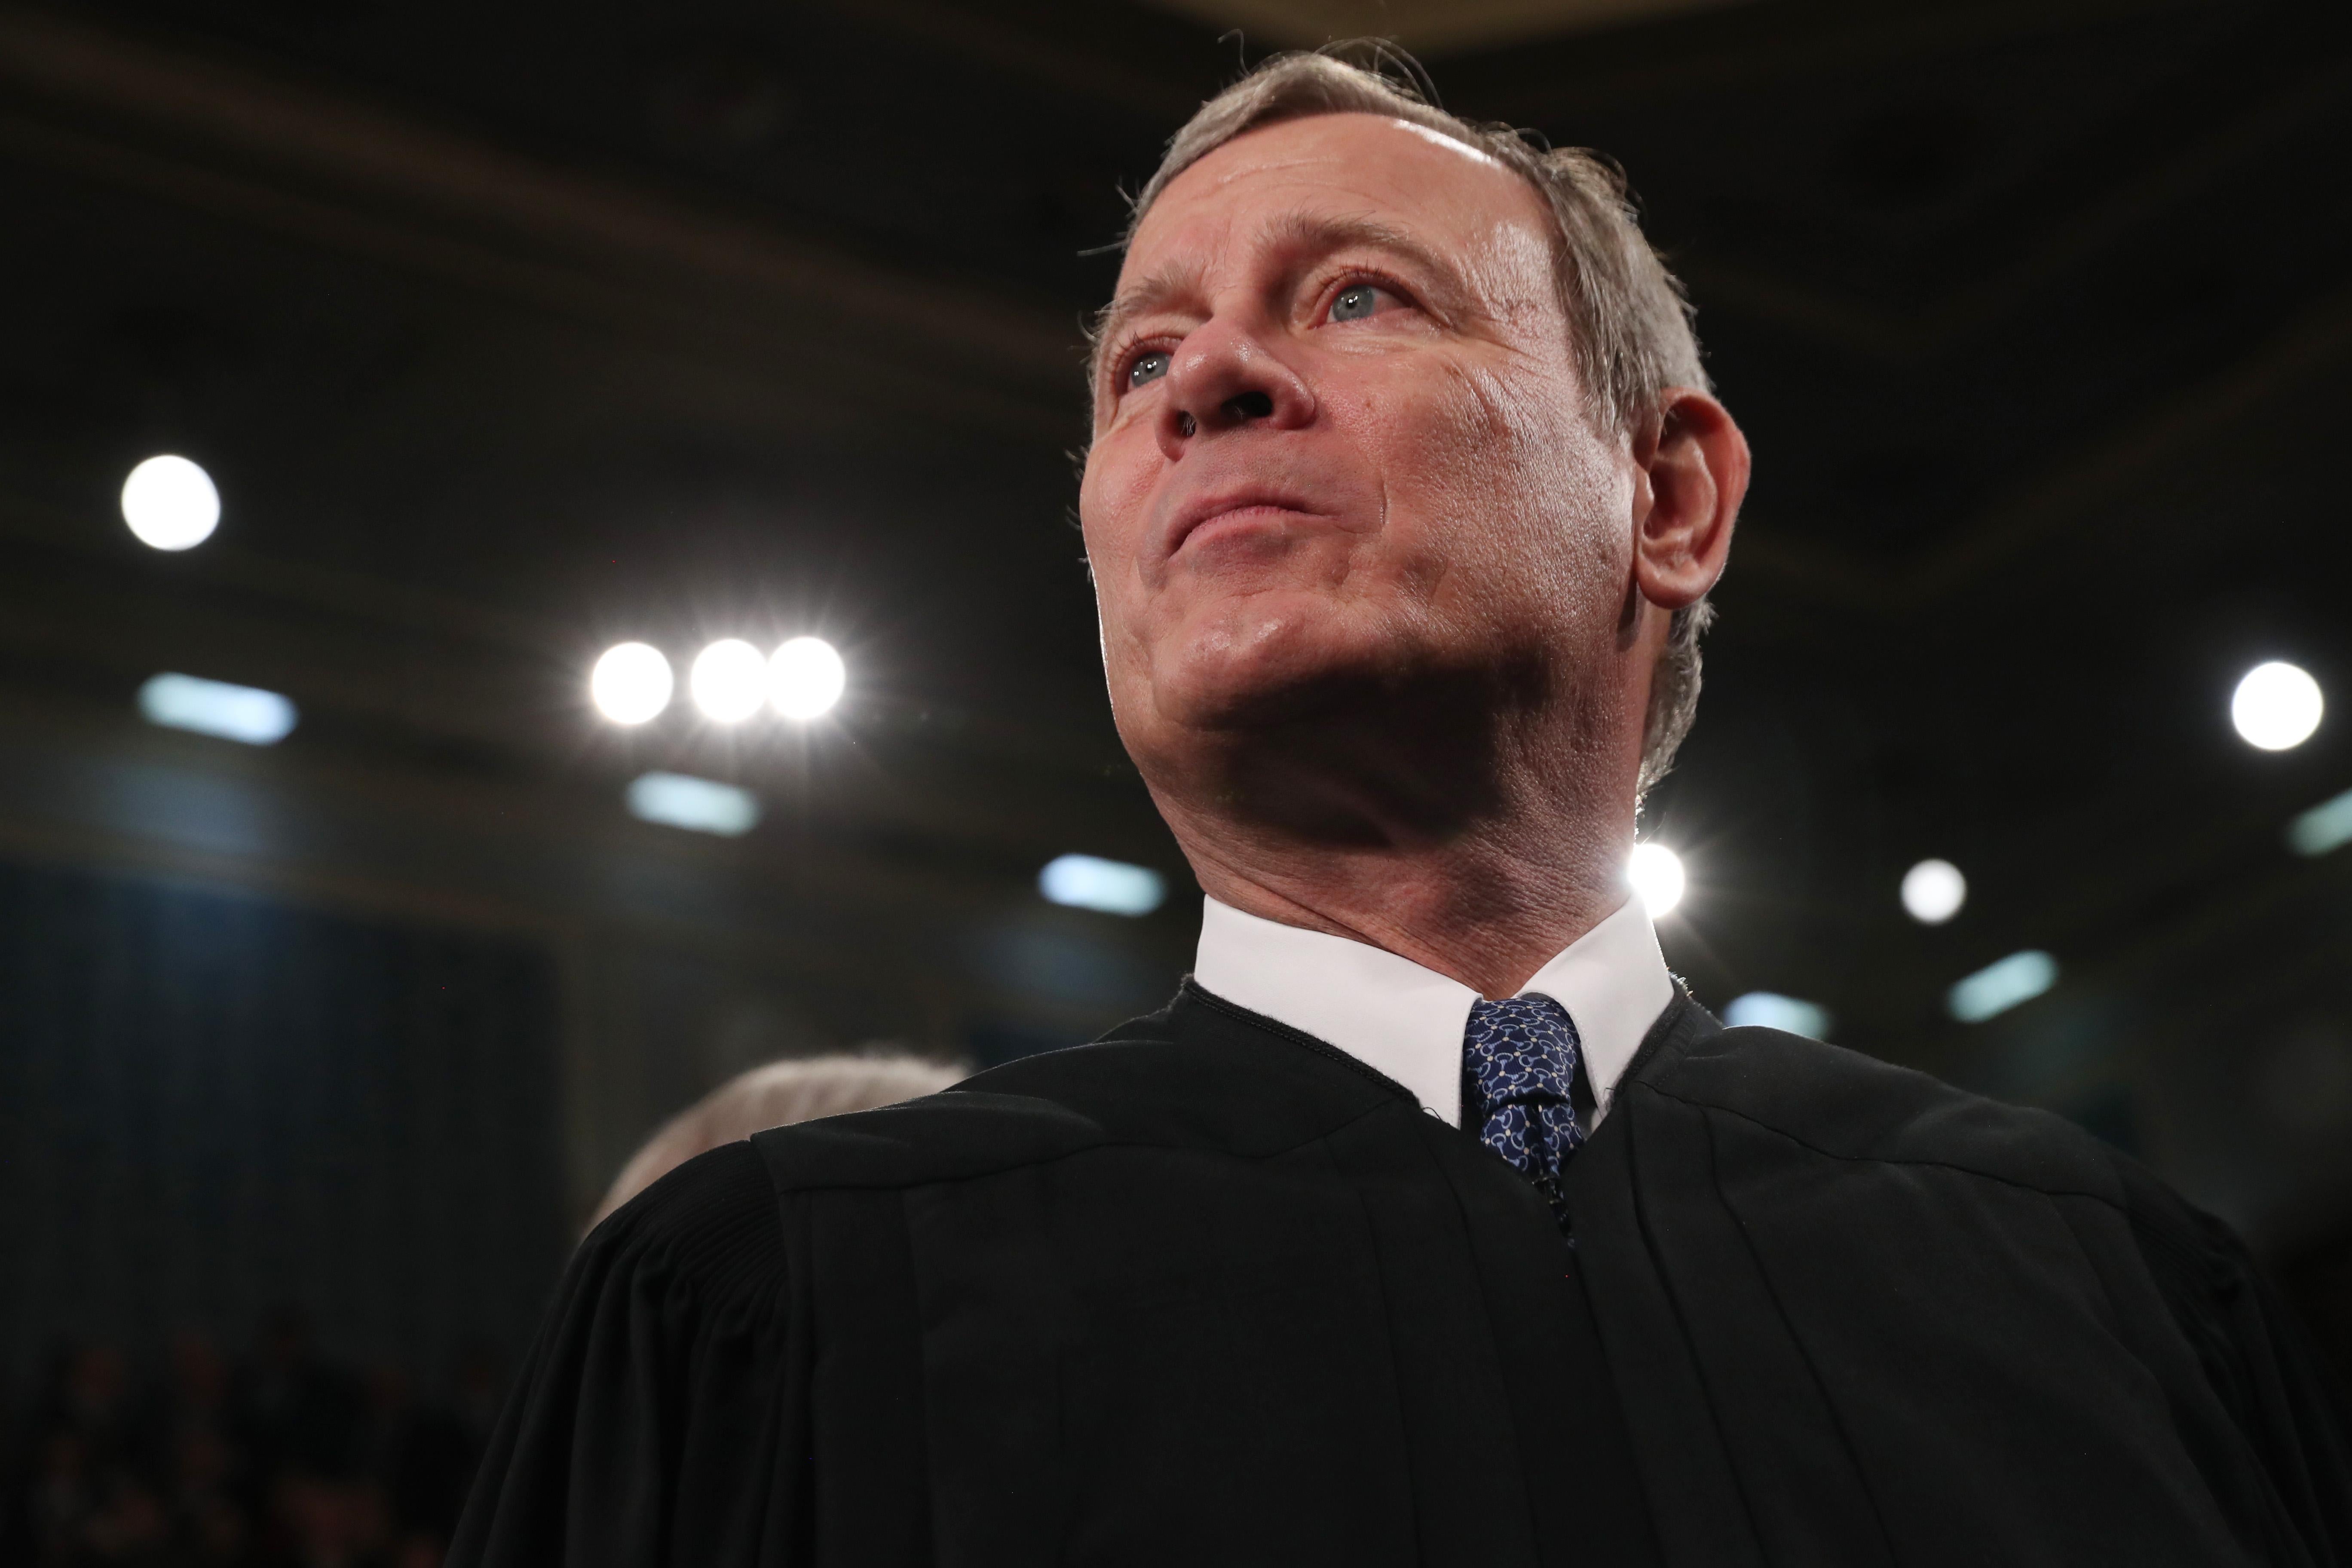 John Roberts in robes at the State of the Union address.